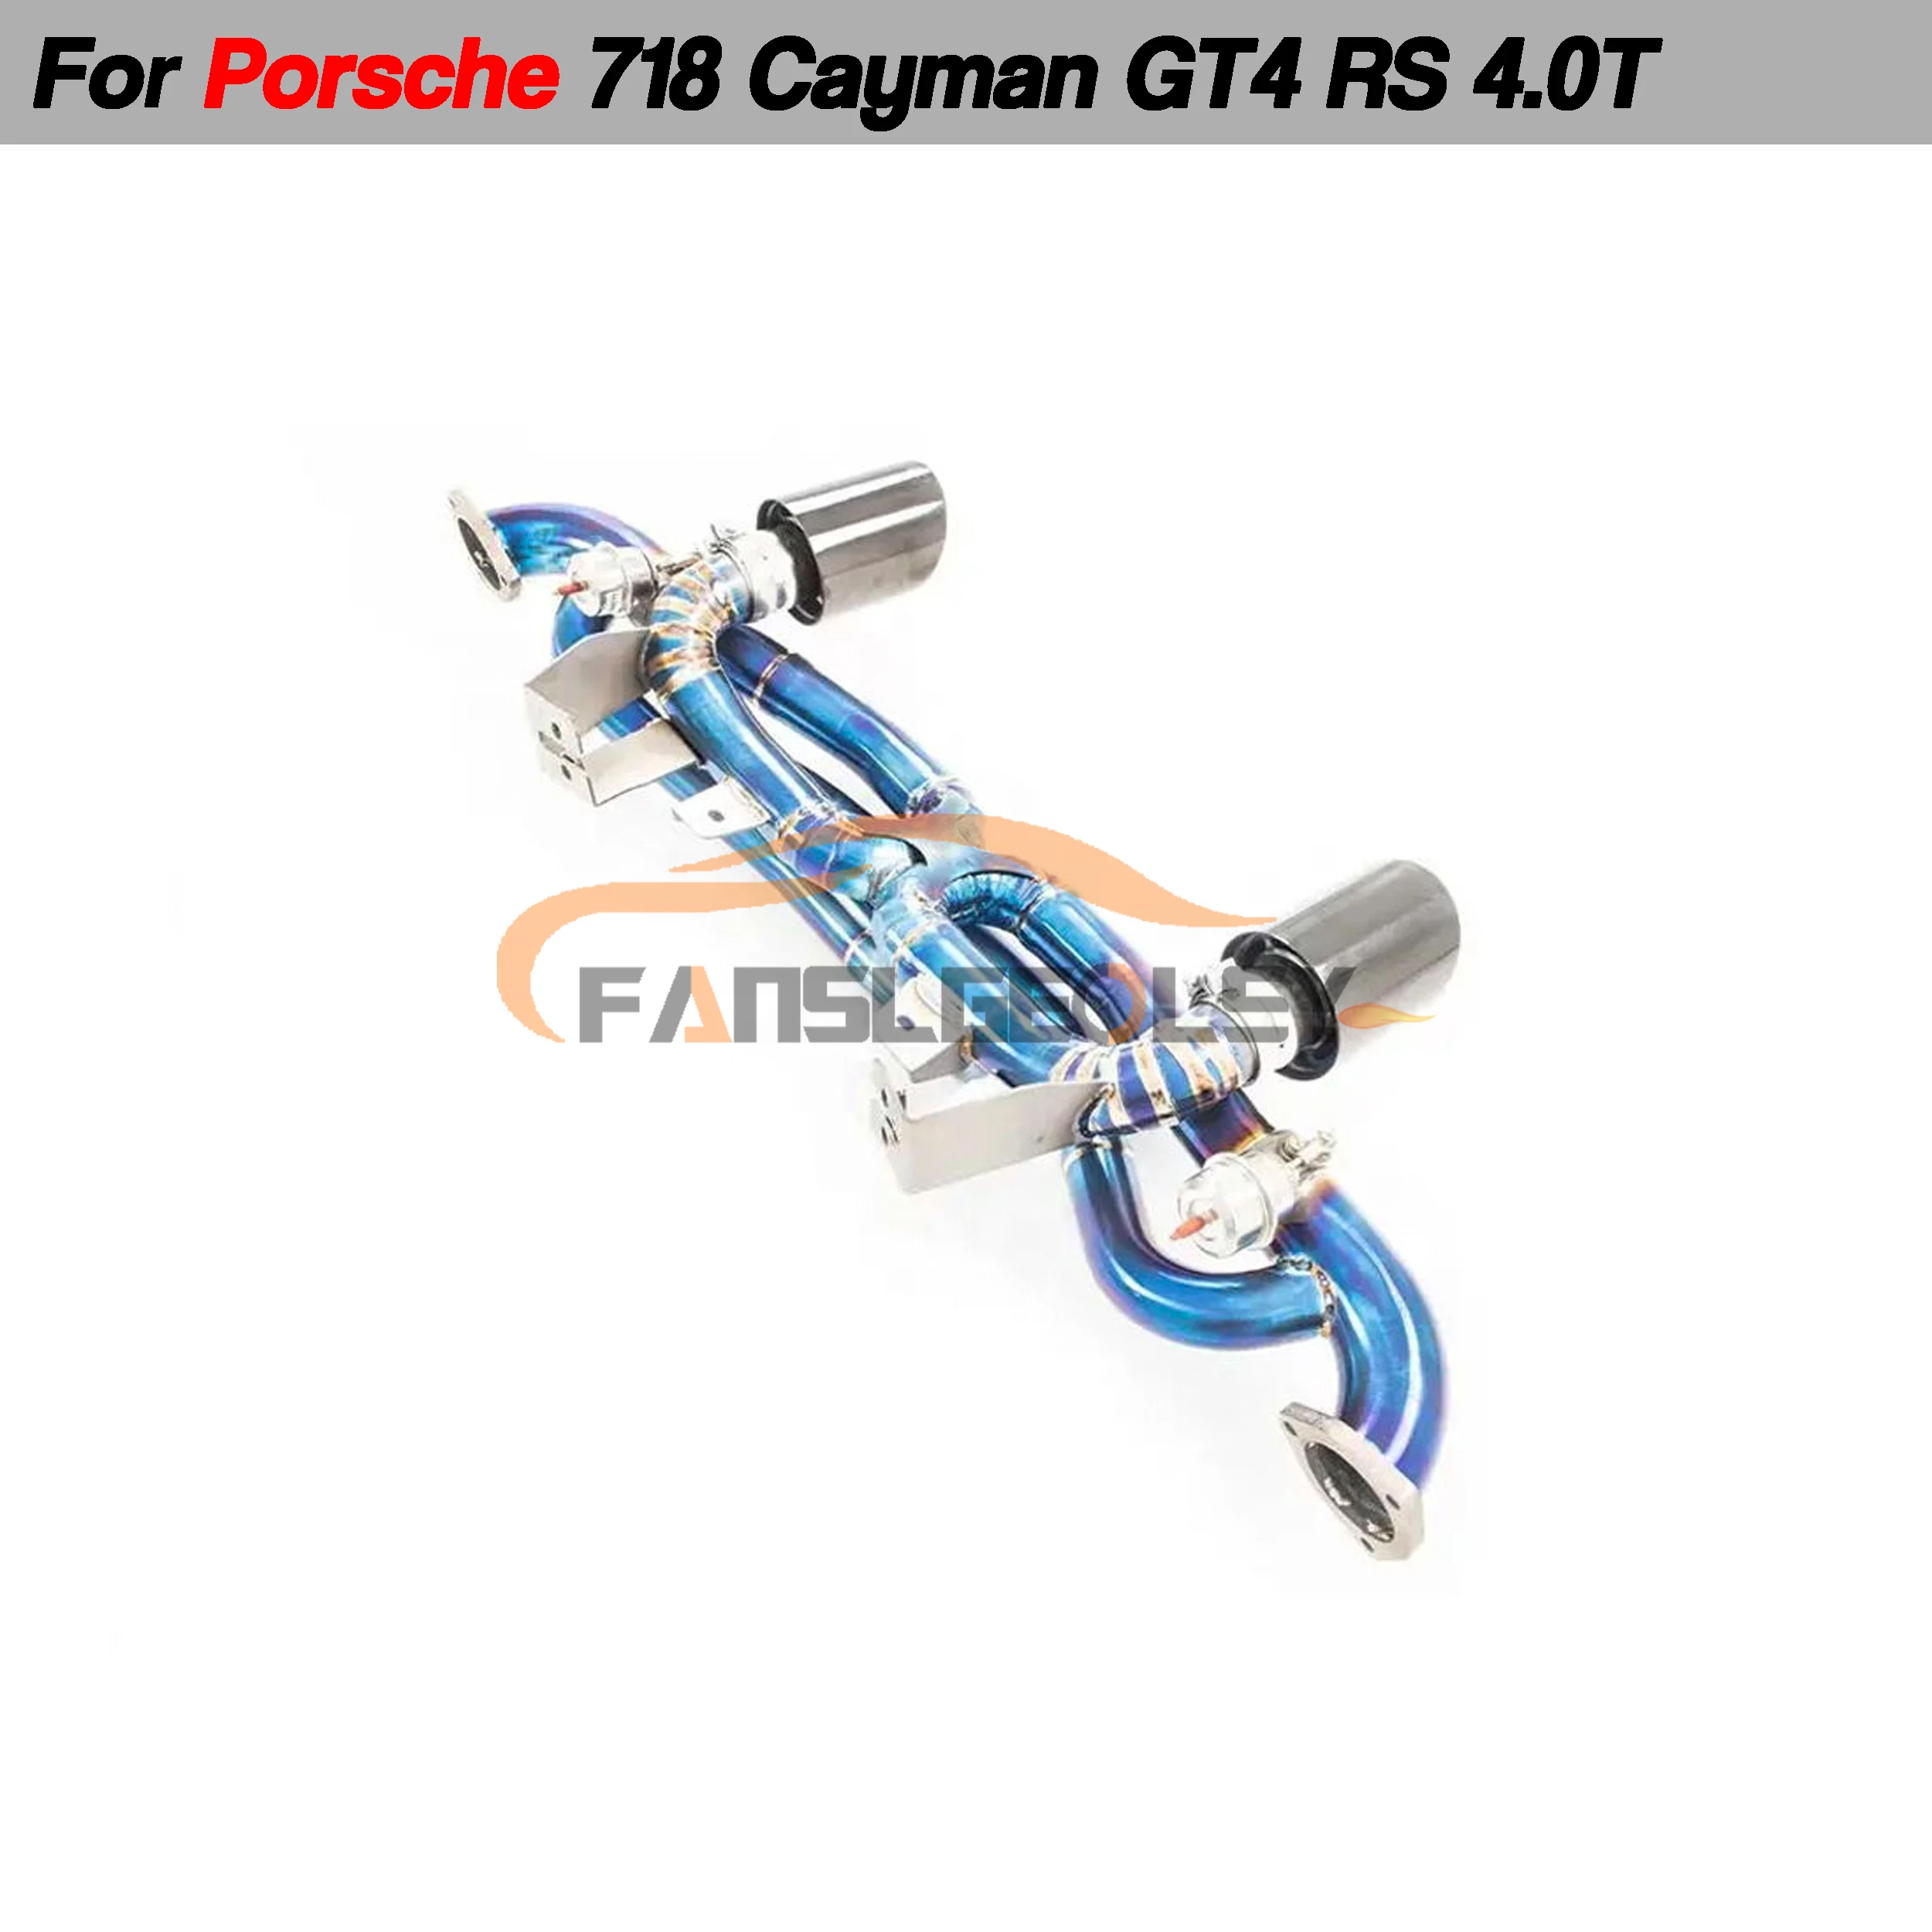 

For Porsche 718 Cayman GT4 RS 4.0T Titanium Catback Performance Exhaust System Valve With Muffler Pipes Tuning exhaust assembly